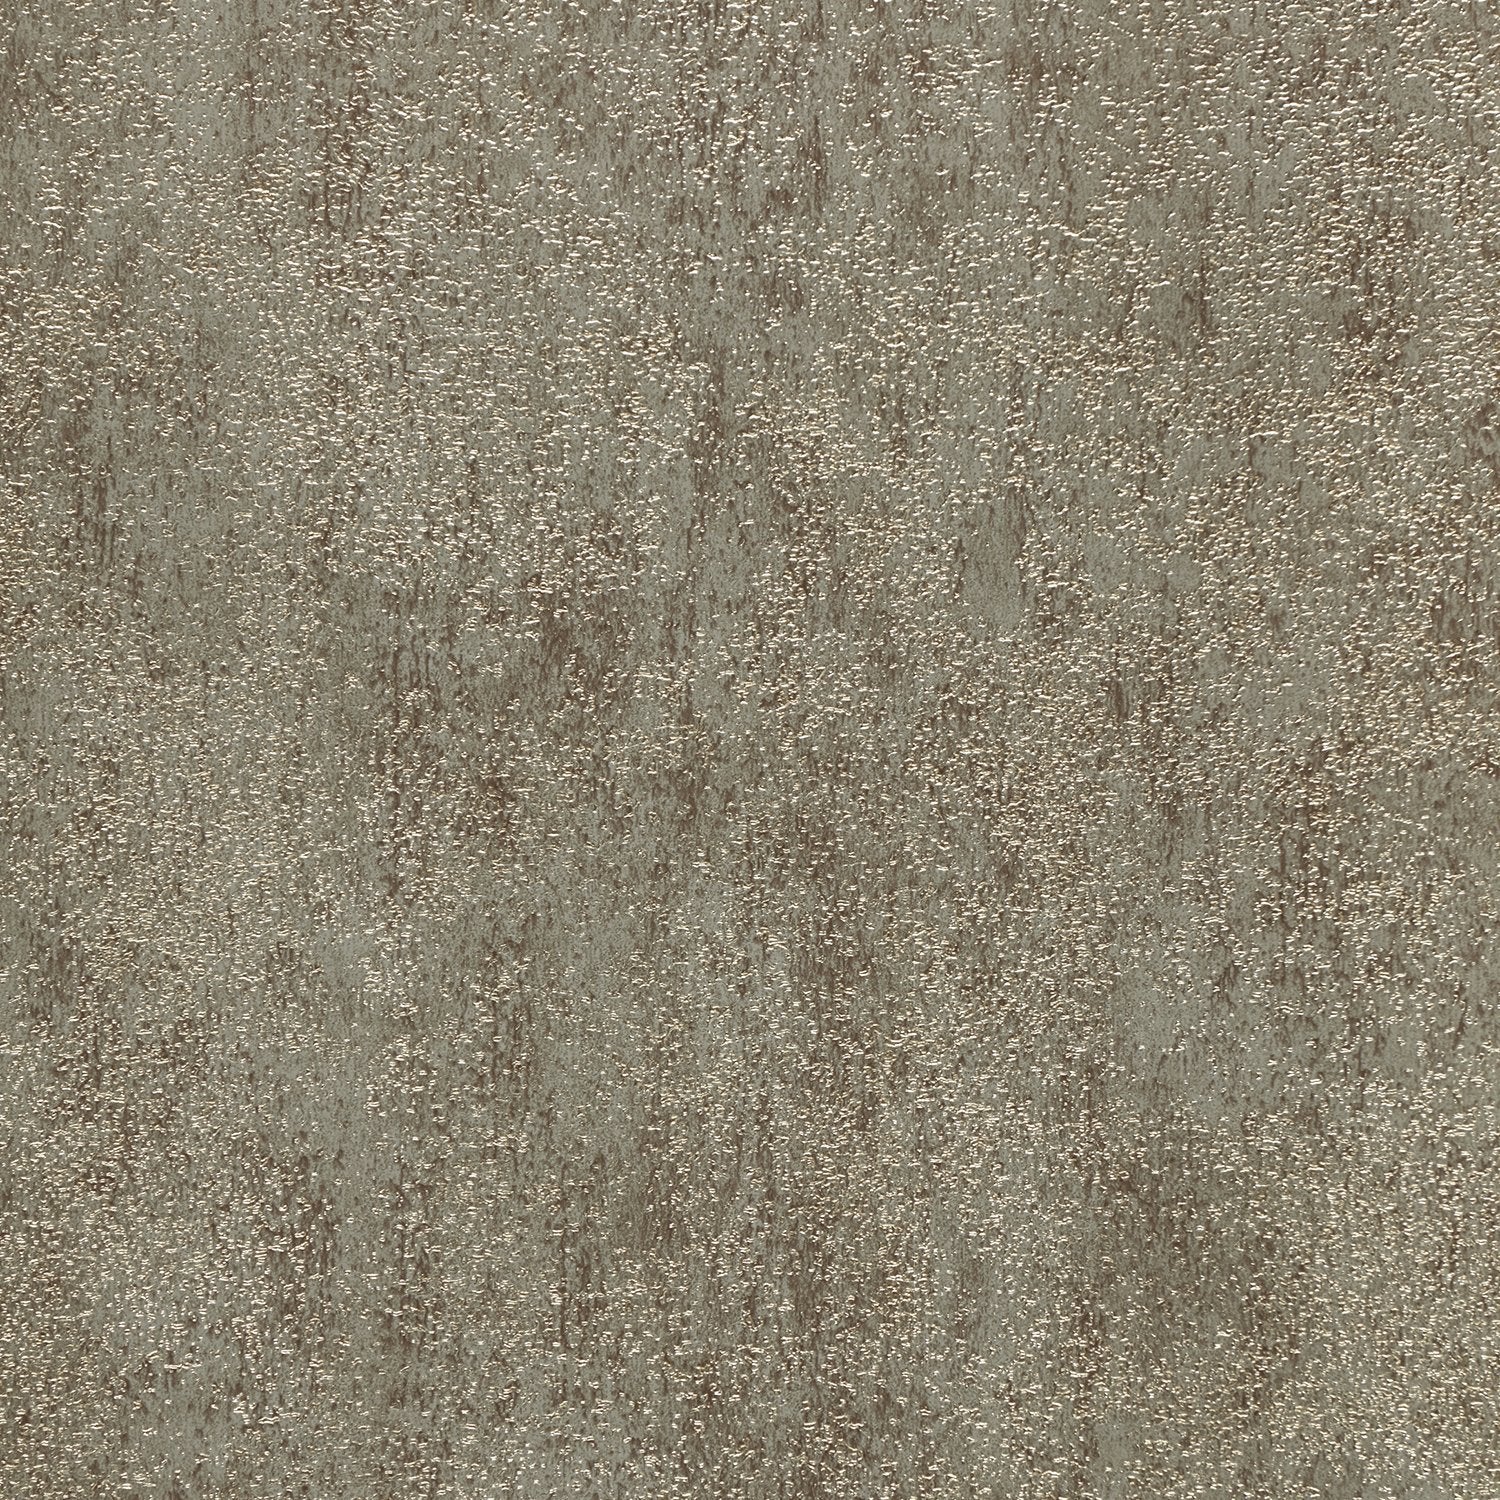 Patina Stone - Y47489 - Wallcovering - Vycon - Kube Contract